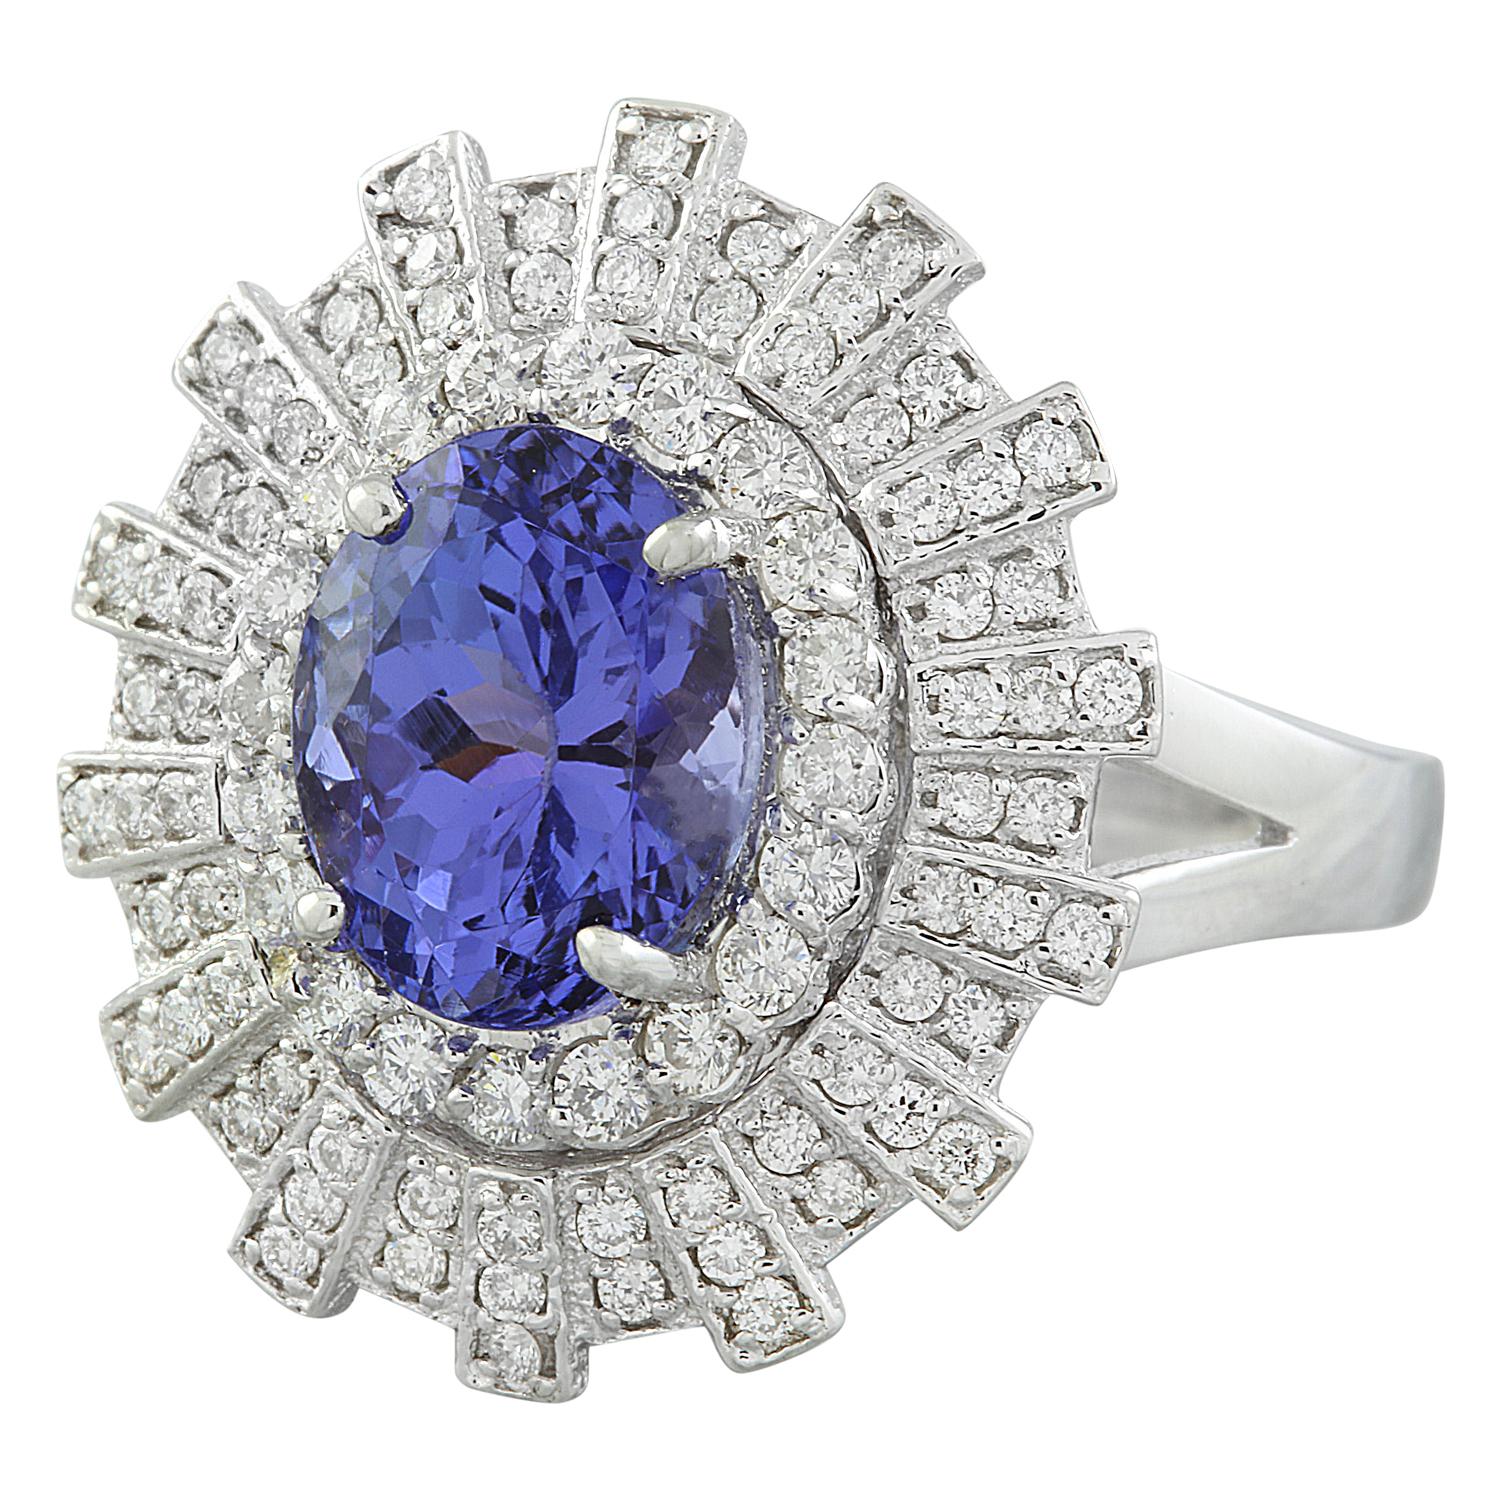 4.49 Carat Natural Tanzanite 14 Karat Solid White Gold Diamond Ring
Stamped: 14K 
Total Ring Weight: 7.4 Grams 
Tanzanite Weight 3.69 Carat (10.00x8.00 Millimeters)
Diamond Weight: 0.80 carat (F-G Color, VS2-SI1 Clarity )
Quantity: 90
Face Measures: